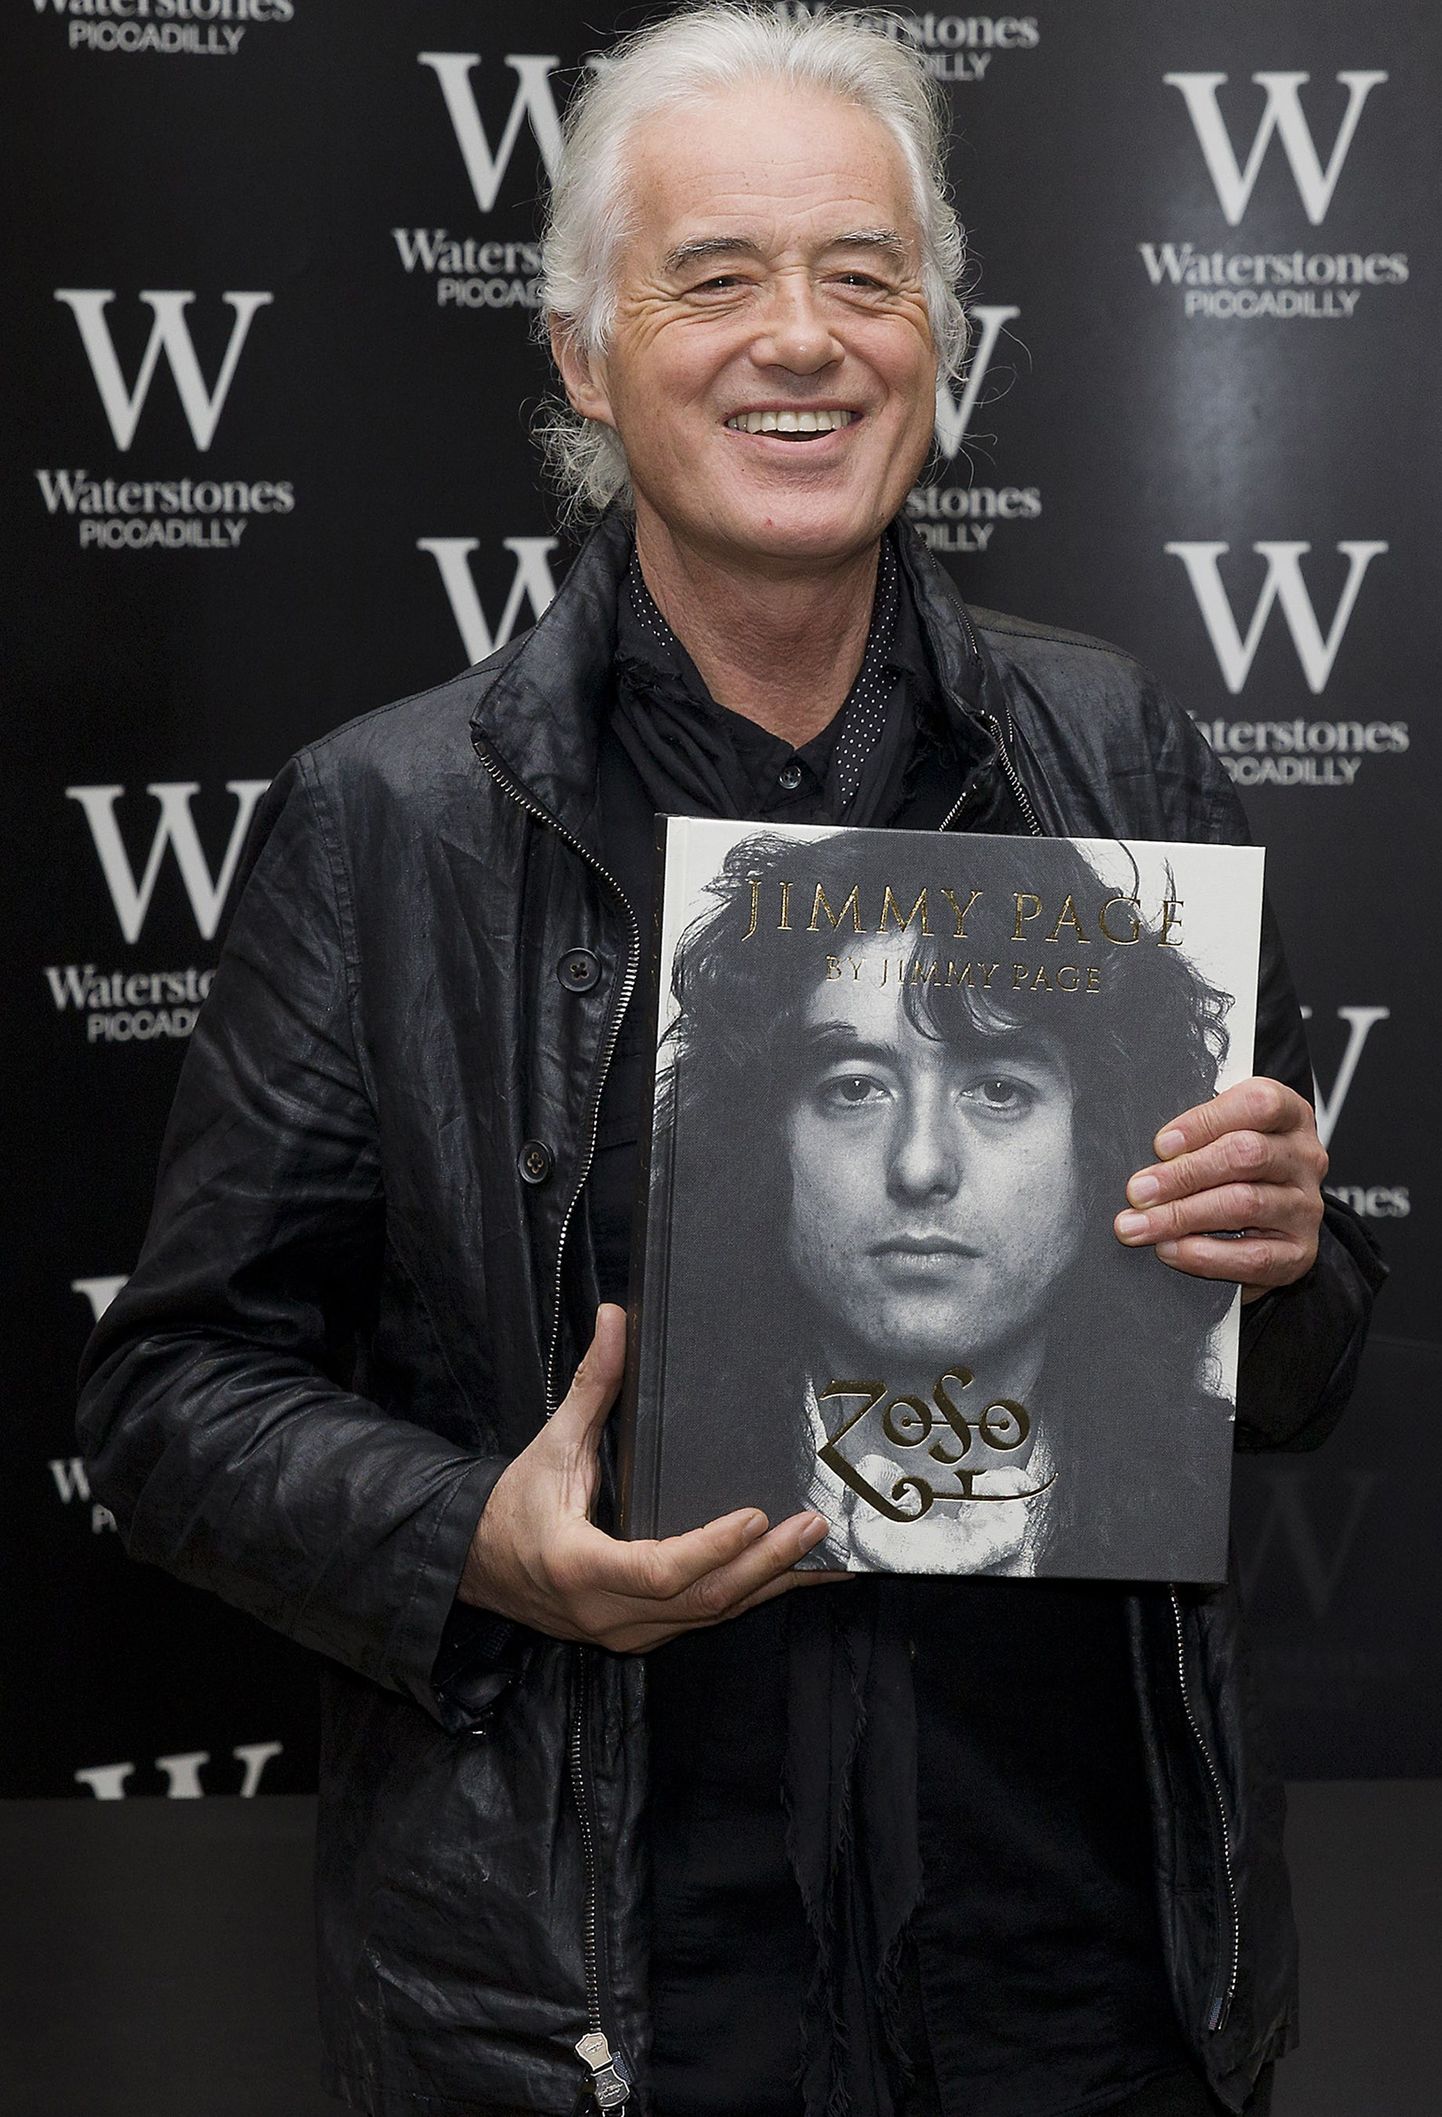 British musician Jimmy Page poses for pictures before signing his new book entitled 'Jimmy Page by Jimmy Page' at a Waterstones book shop in central London, on December 2, 2014. AFP PHOTO / JUSTIN TALLIS